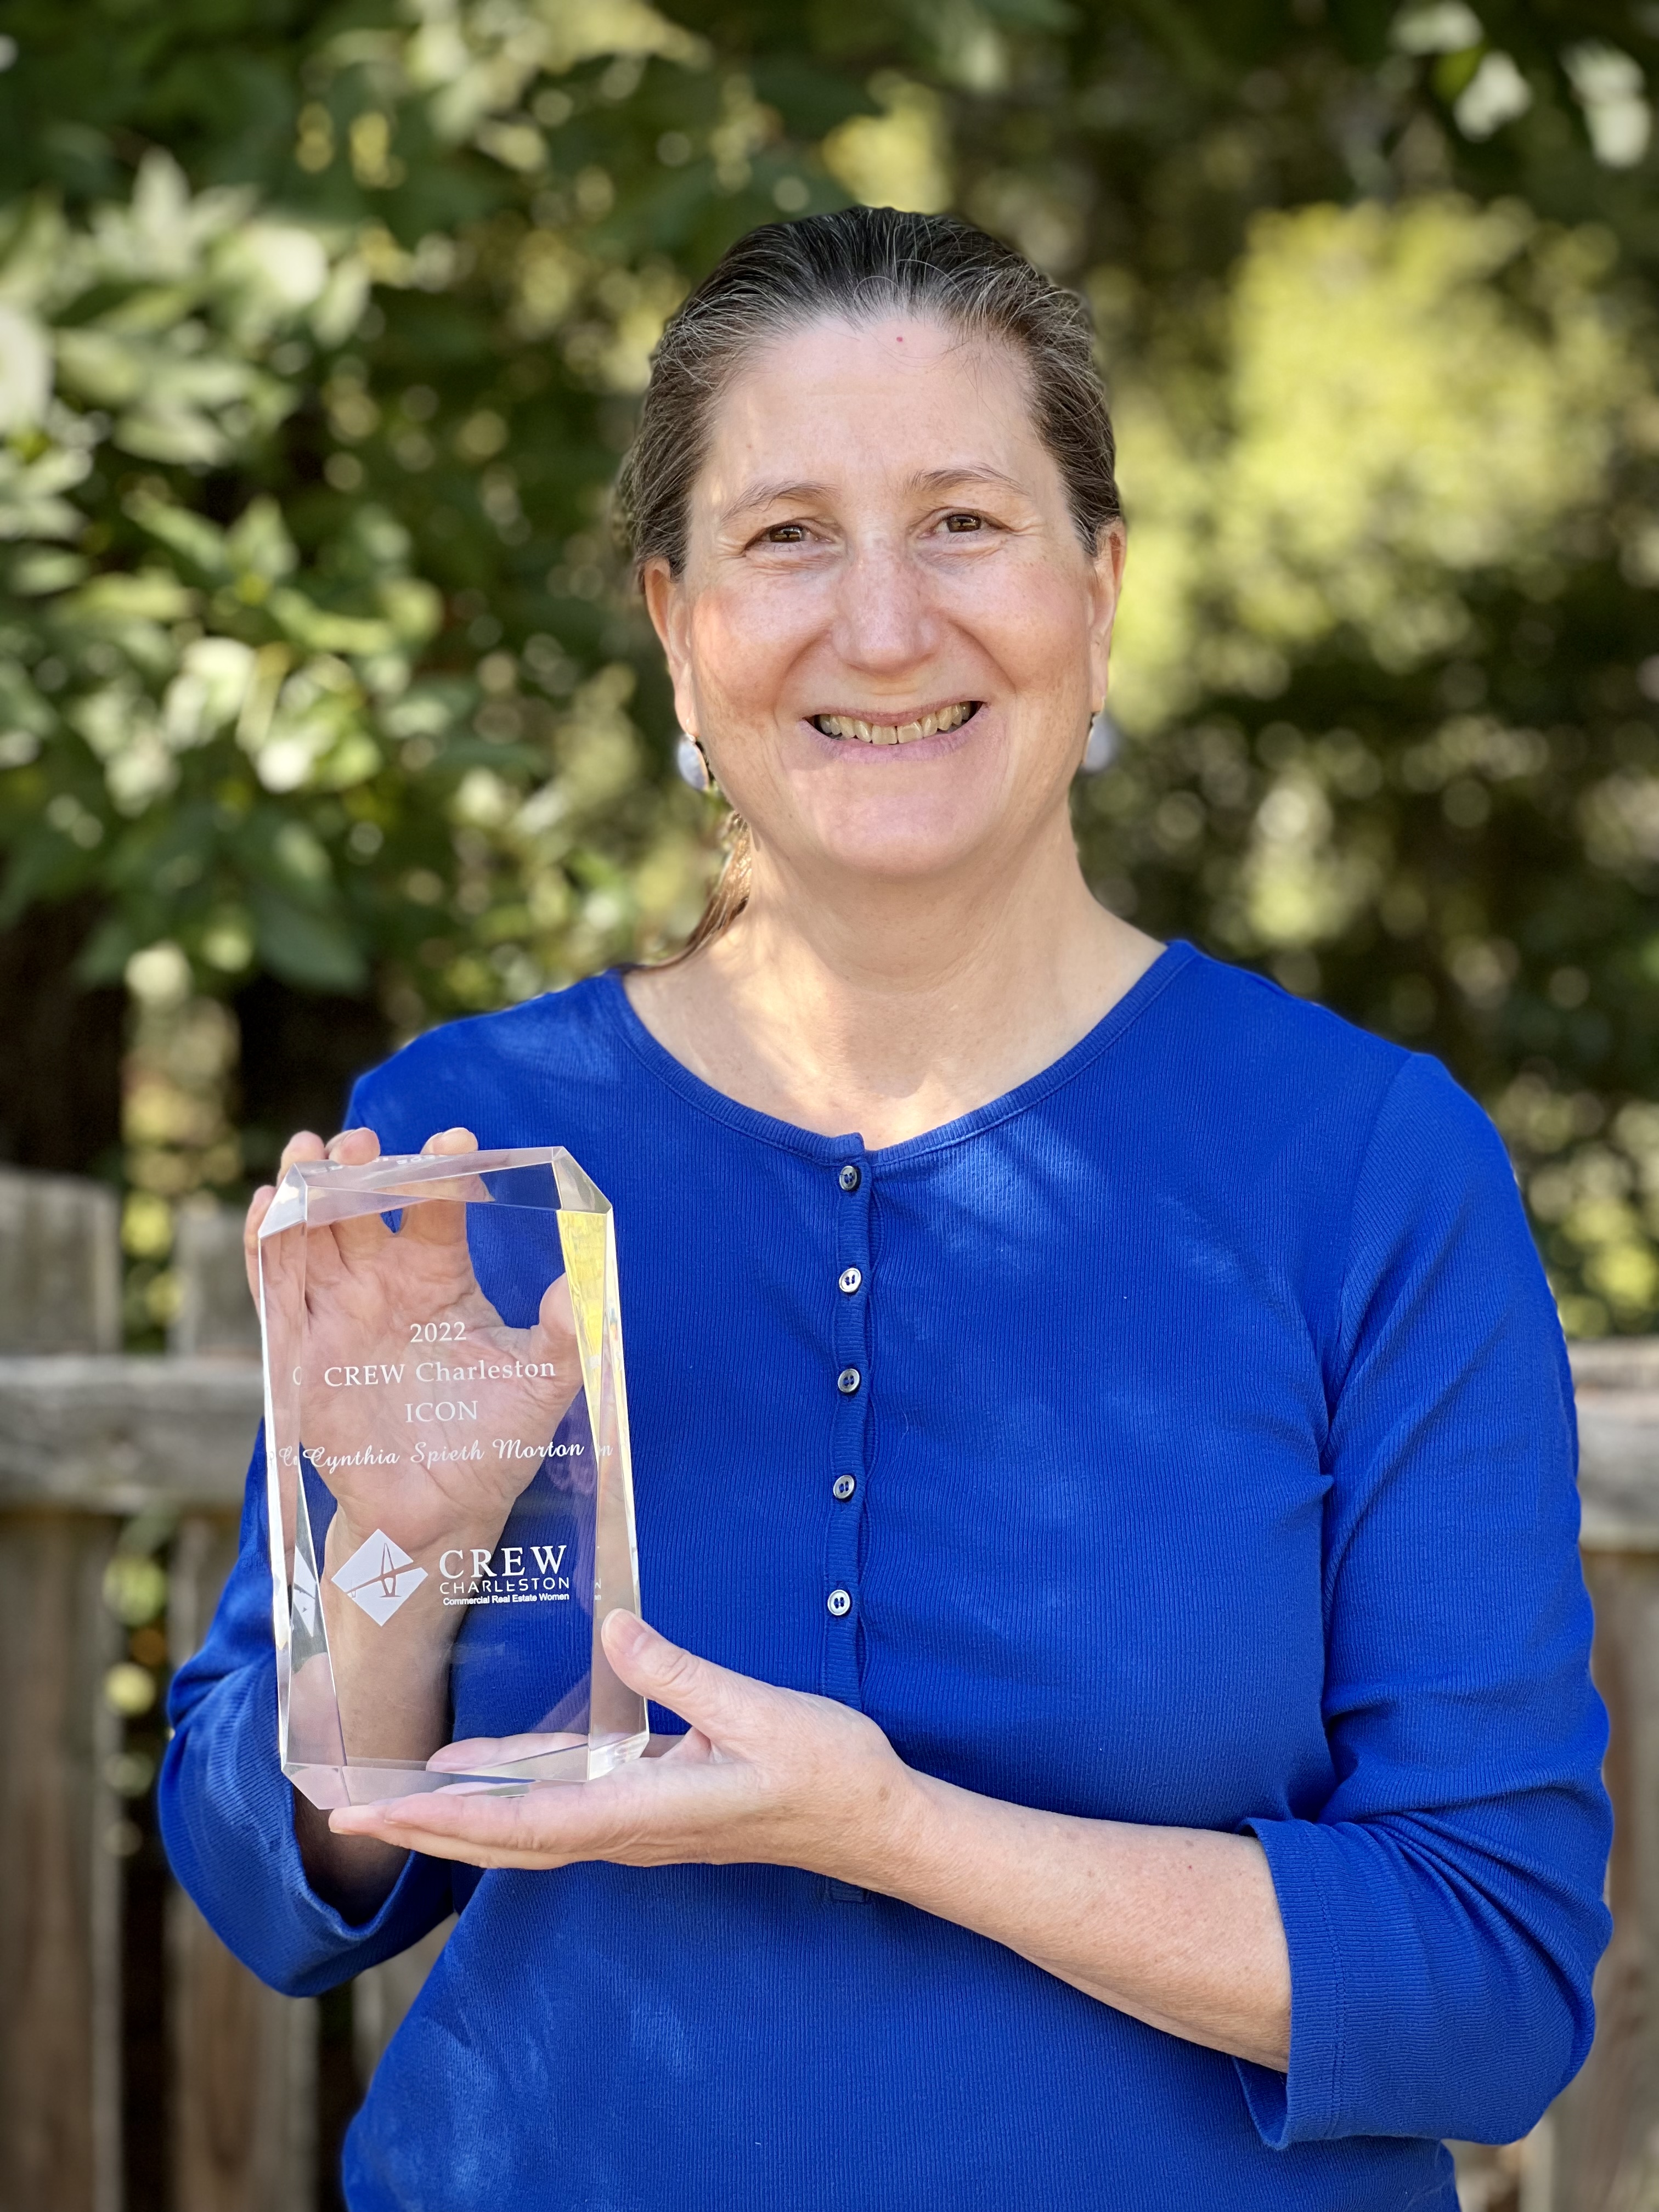 Cynthia Spieth Morton holds a plaque for her 2022 CREW (Commercial Real Estate Women) Charleston Icon Award. She is wearing a blue shirt and stands in front of a green, natural background.